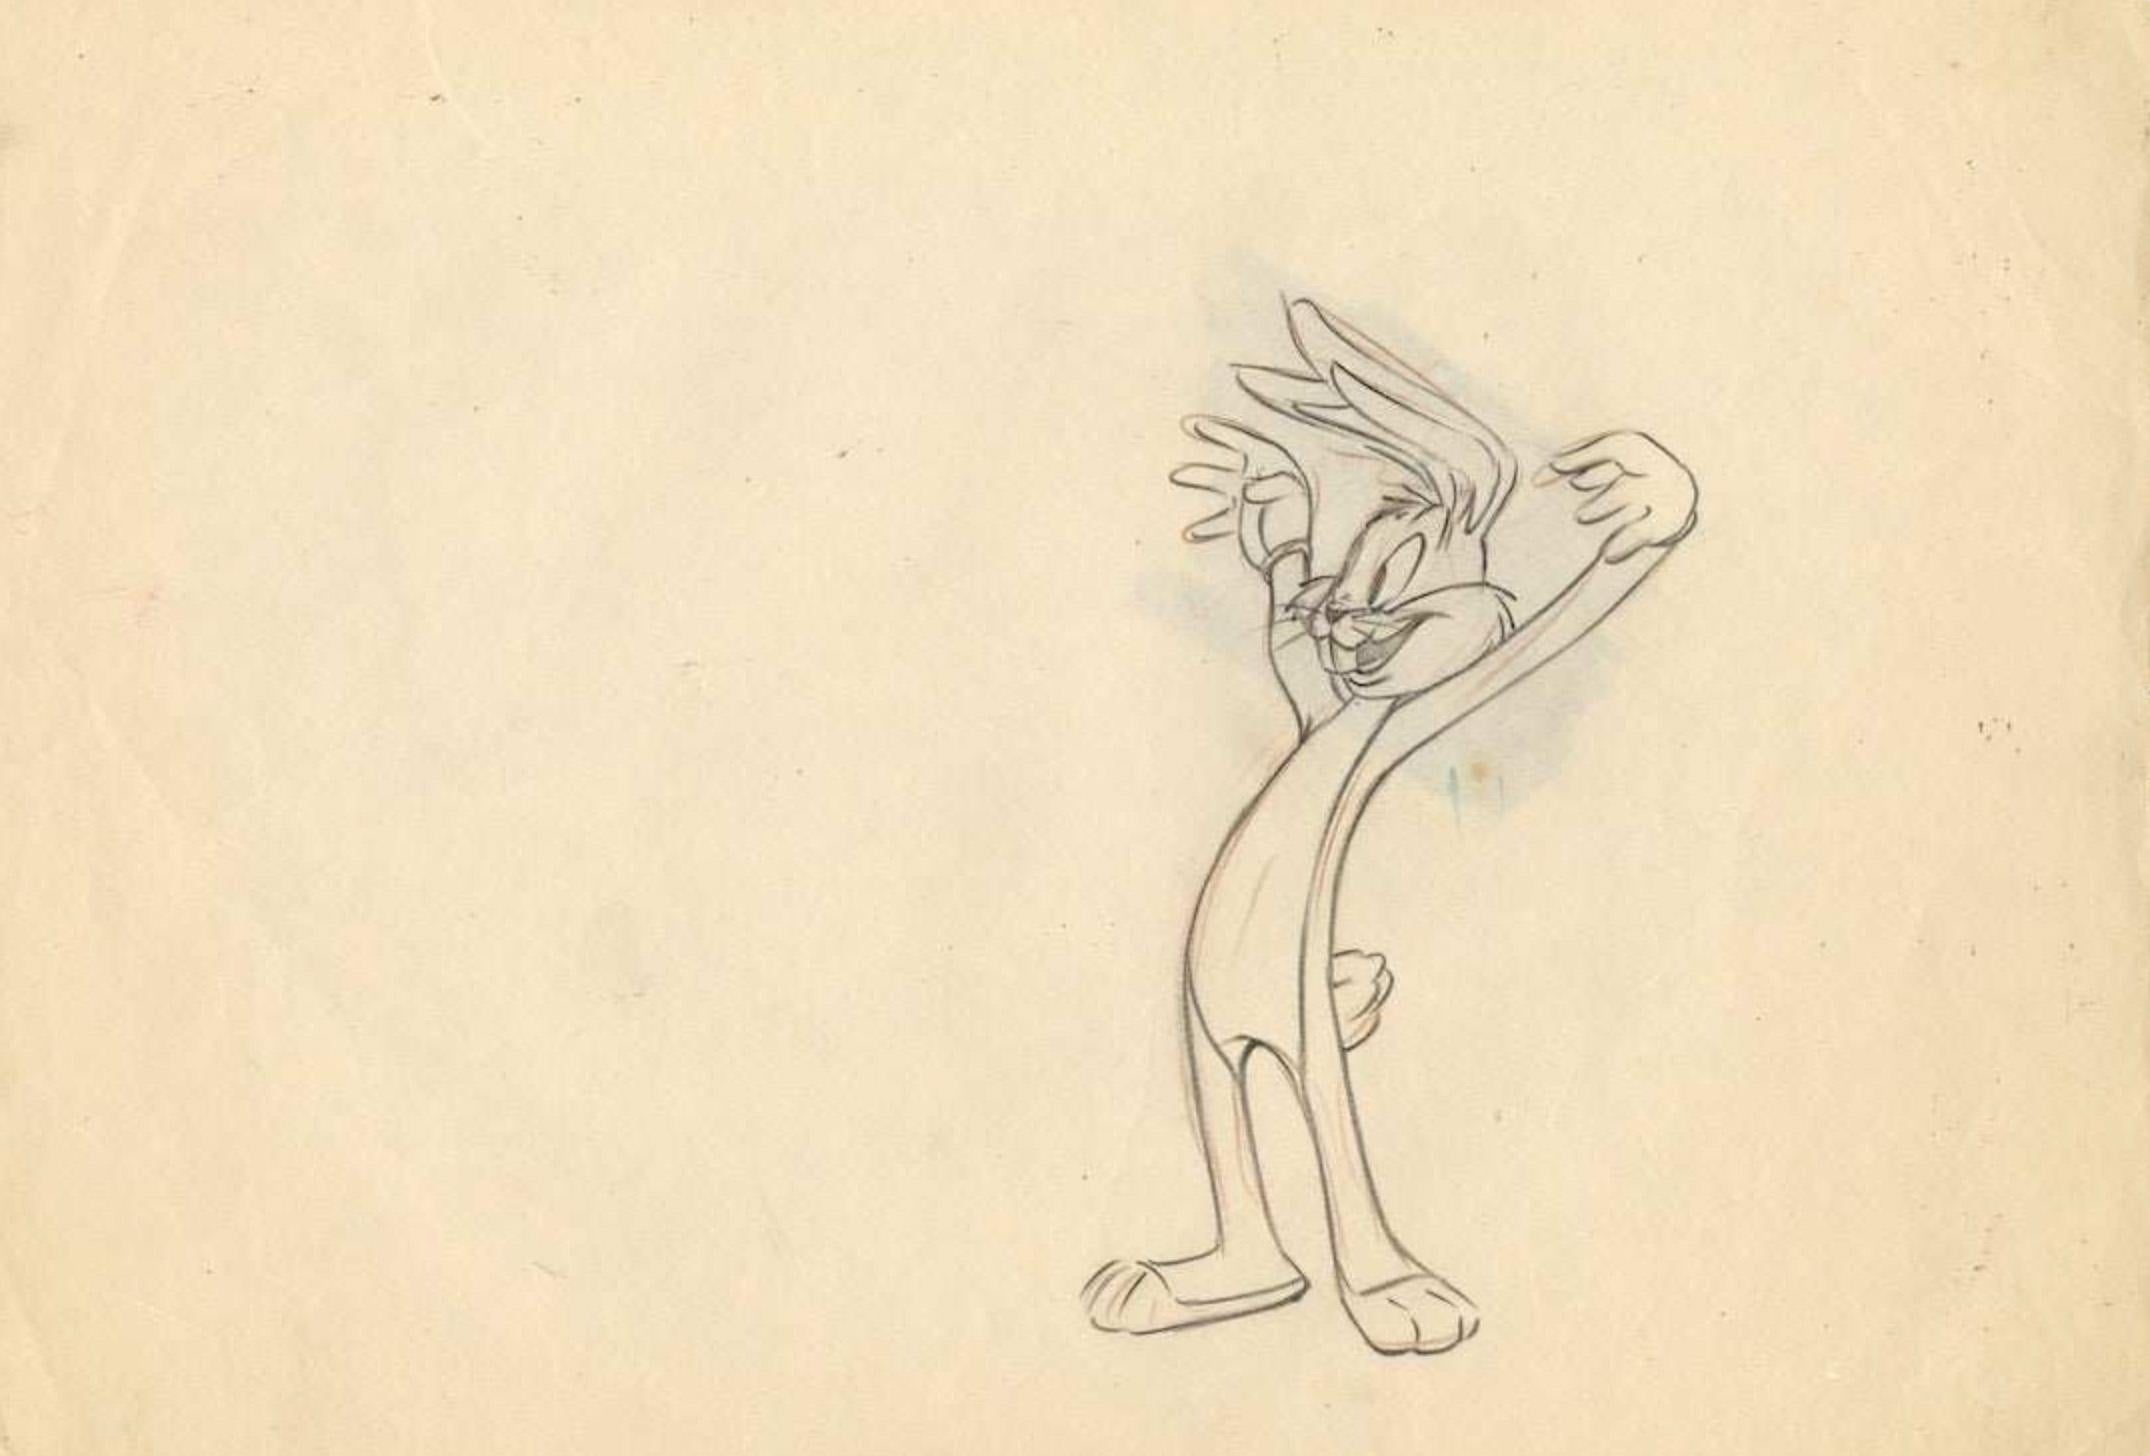 Bugs Bunny and the Three Bears (1944) Original Production Drawing: Bugs Bunny - Art by Warner Bros. Studio Artists